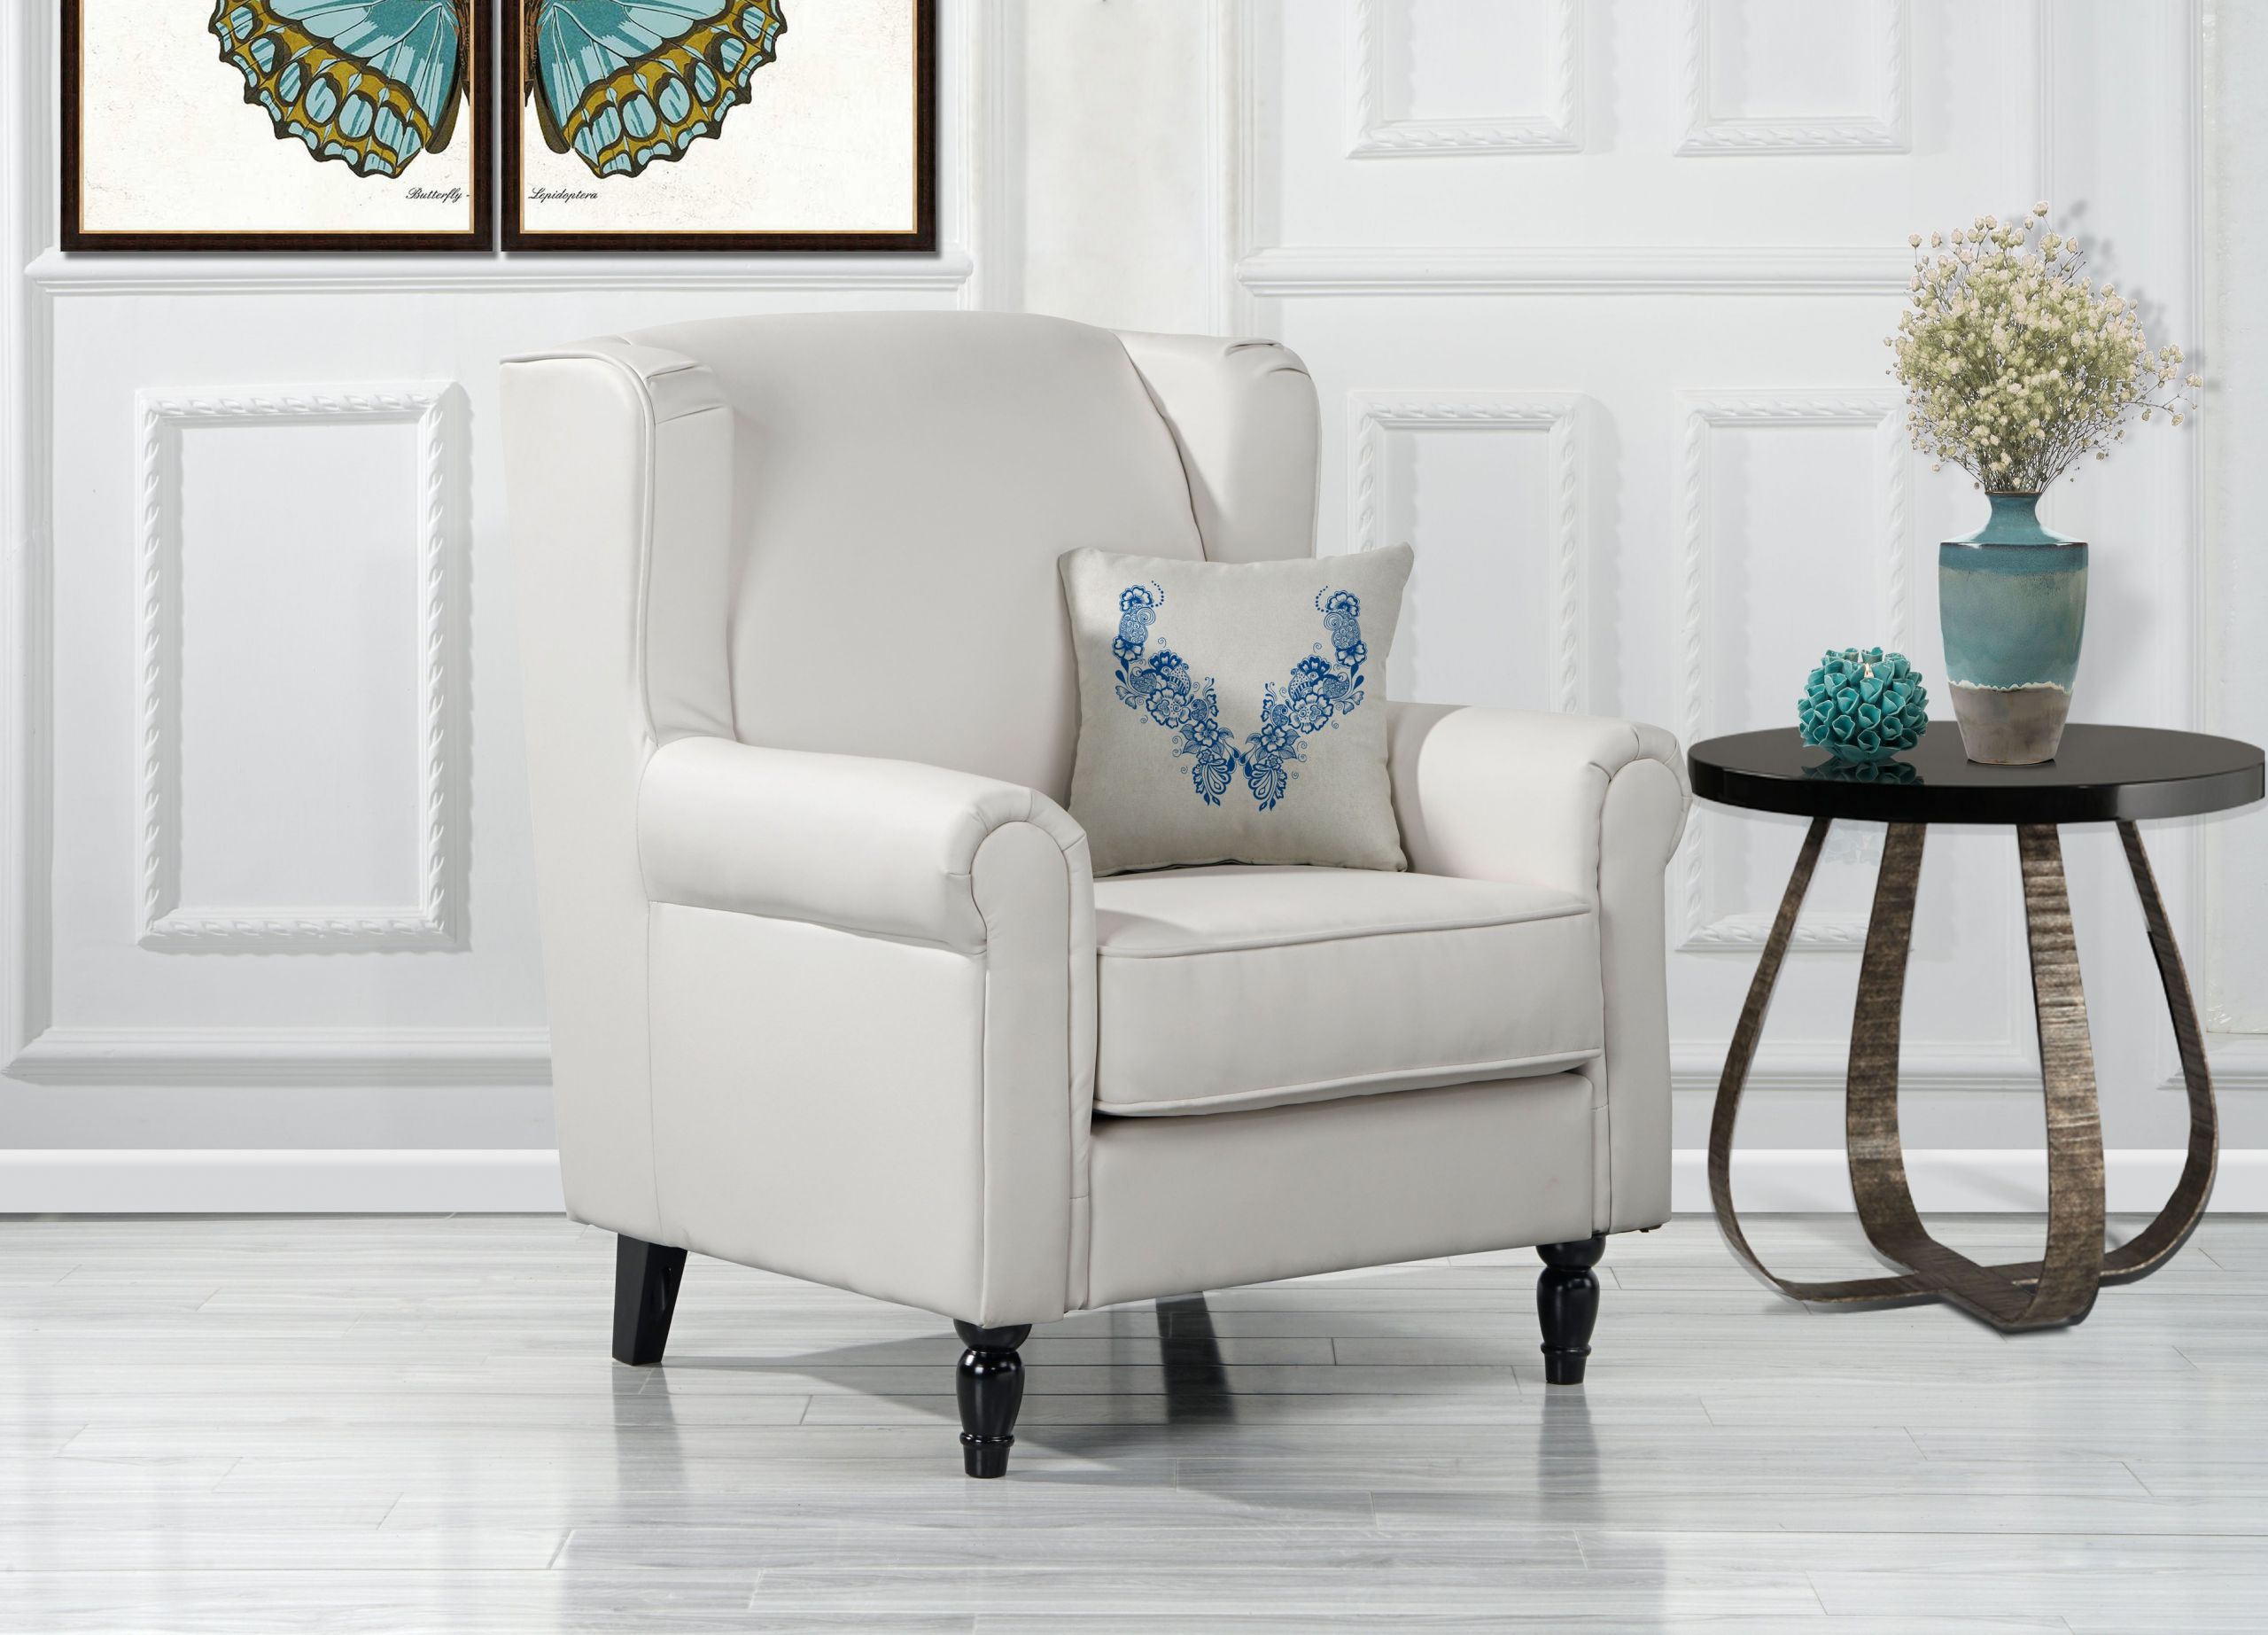 Living Room Armchair
 Classic Scroll Arm Faux Leather Accent Chair Living Room